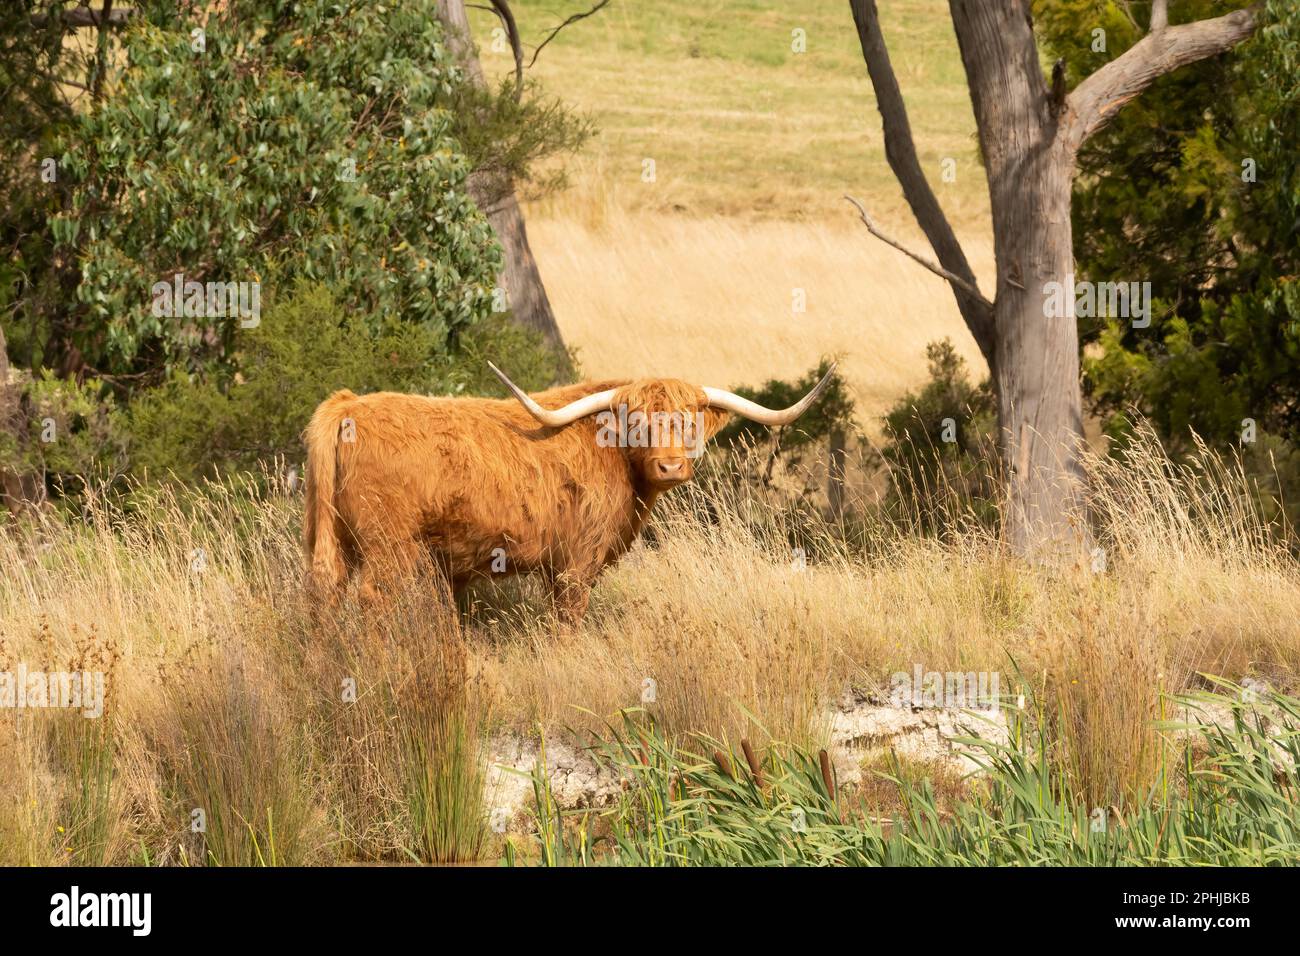 Highland cattle with longhorns part of a breeding stock in Tasmania also known as Scottish highland cow. Stock Photo